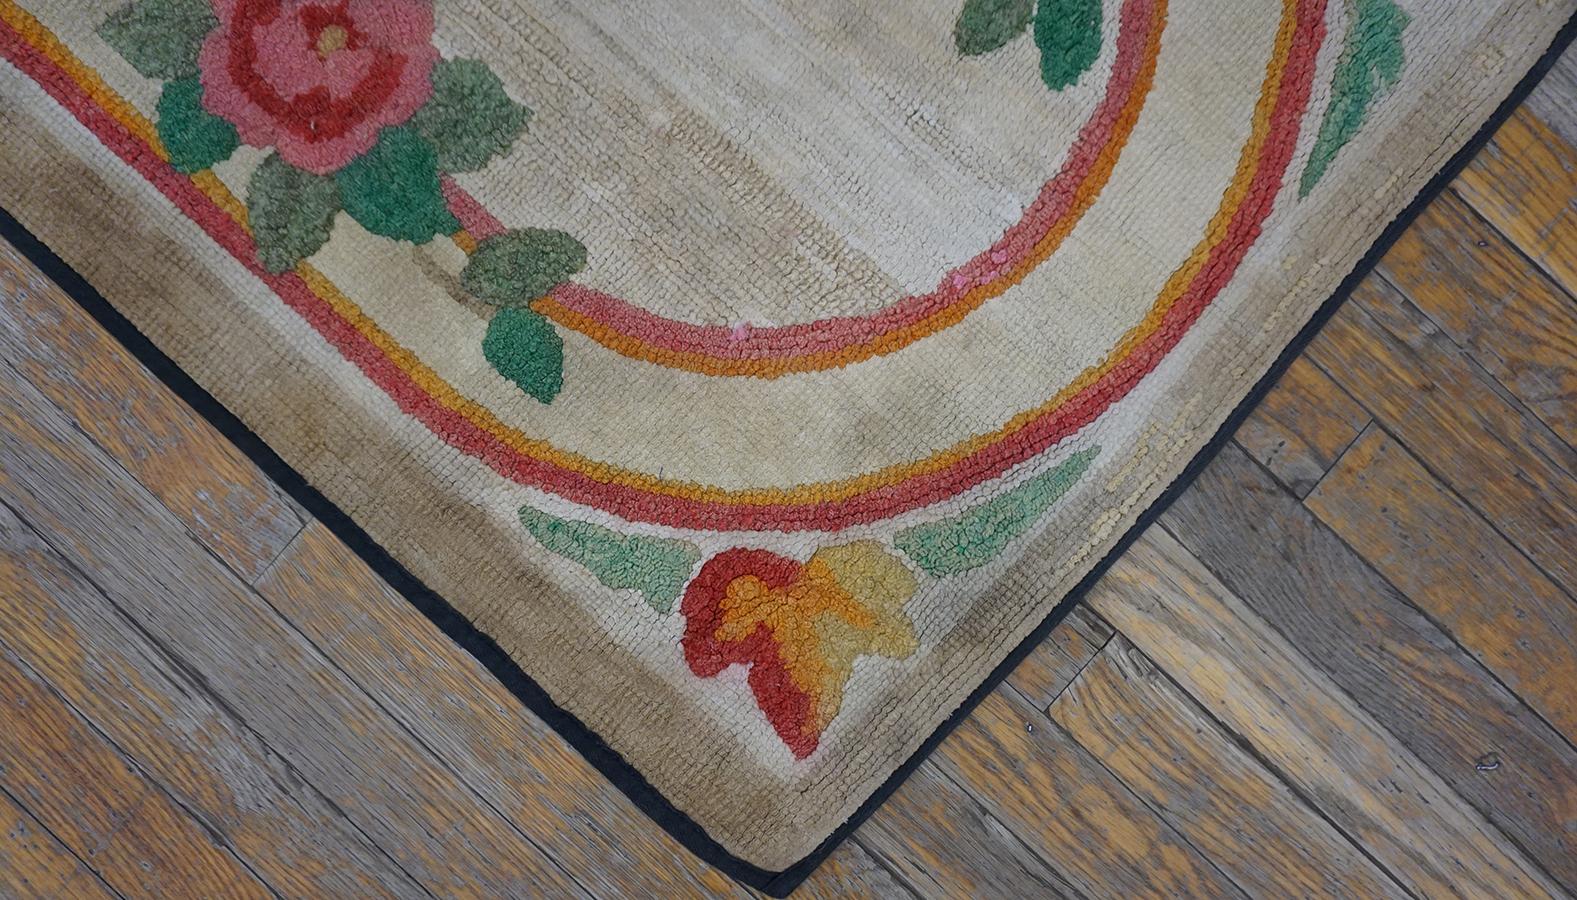 Early 20th Century American Hooked Rug ( 2'6